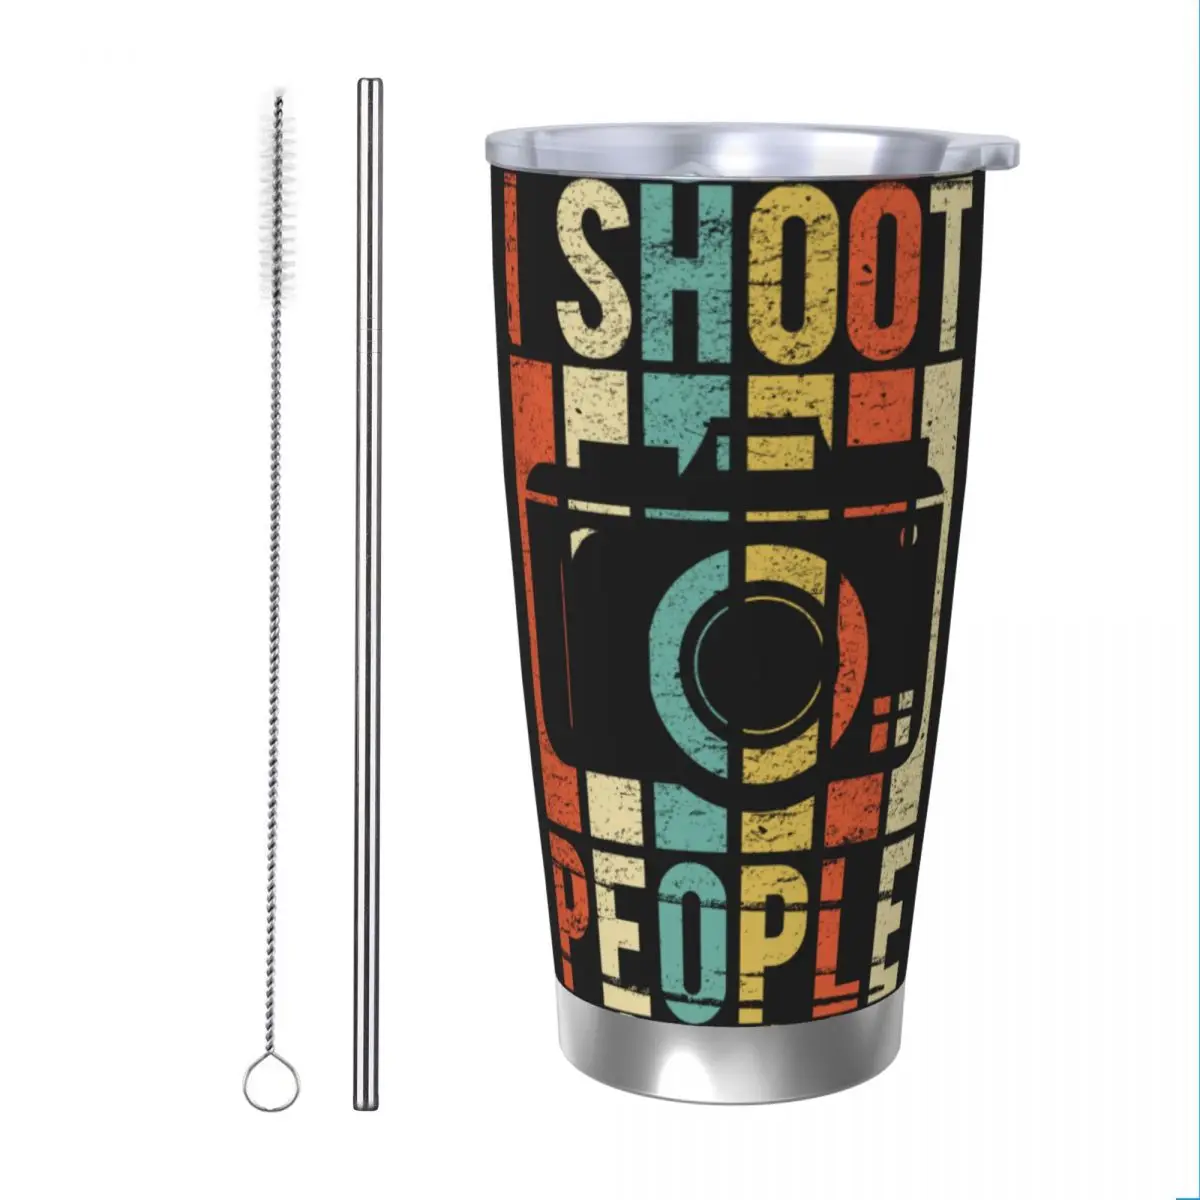 

Vintage Shoot People Photographer Insulated Tumbler with Lid Stainless Steel Thermal Mug Double Wall Hot Cold Drinks Cups, 20oz